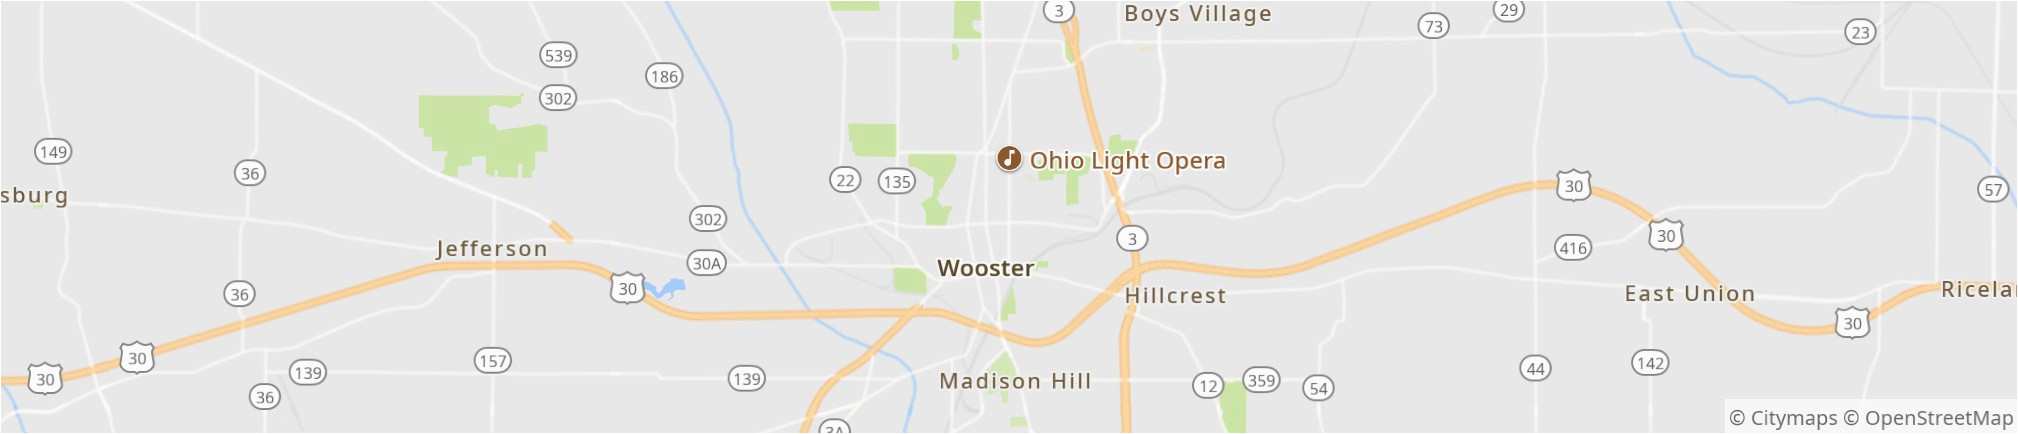 Map Of Wooster Ohio Wooster 2019 Best Of Wooster Oh tourism Tripadvisor